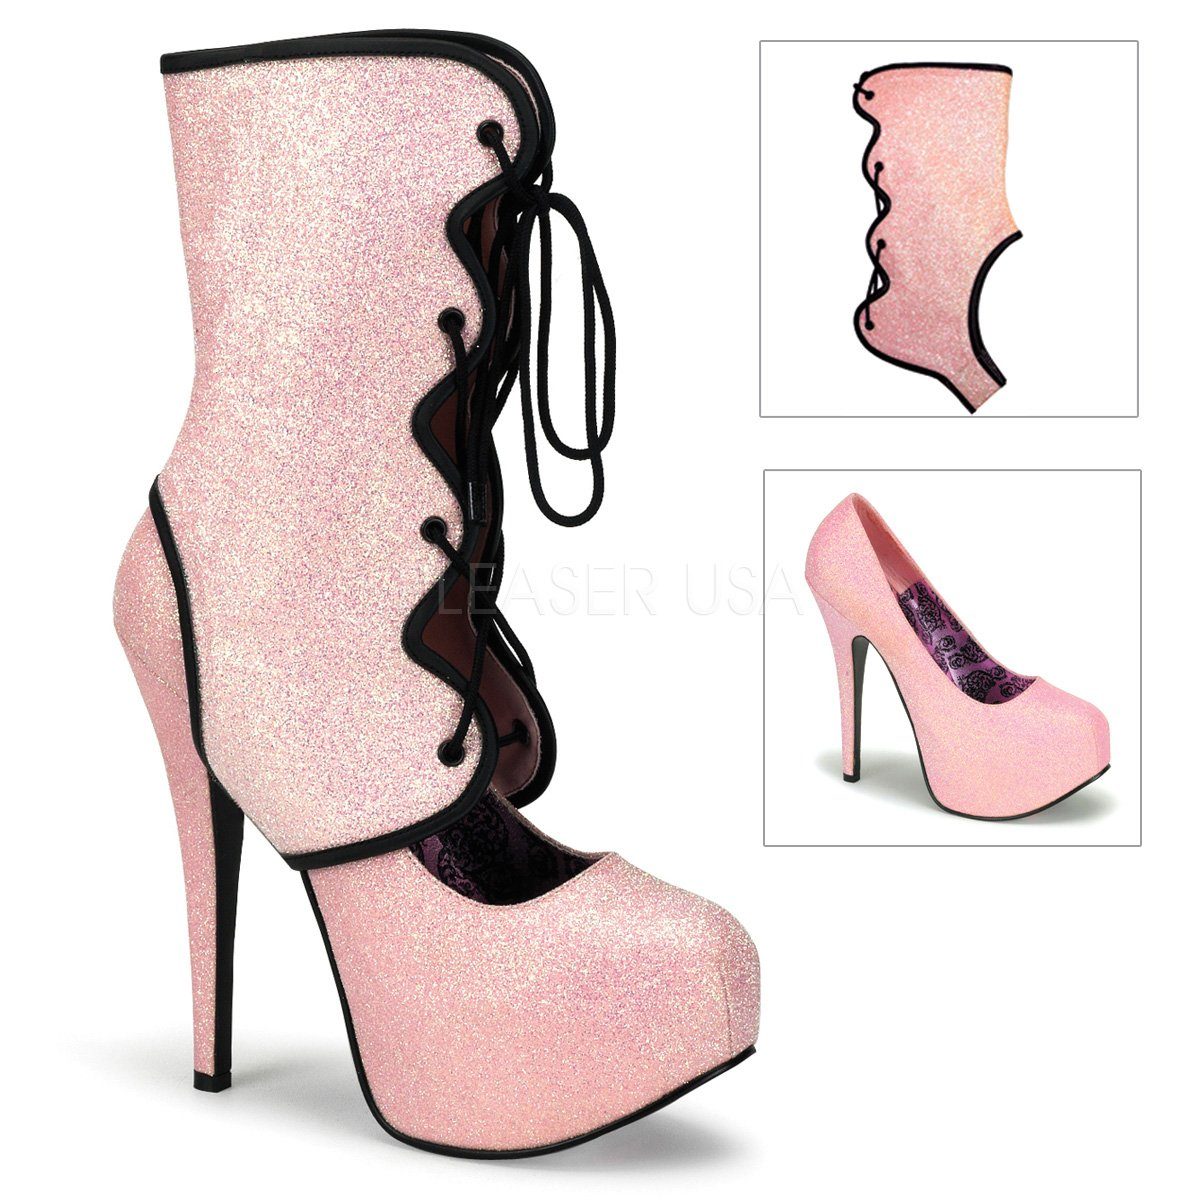 TEEZE-31G - Pumps Plateau Bordello High-Heel-Stiefel Baby Pink